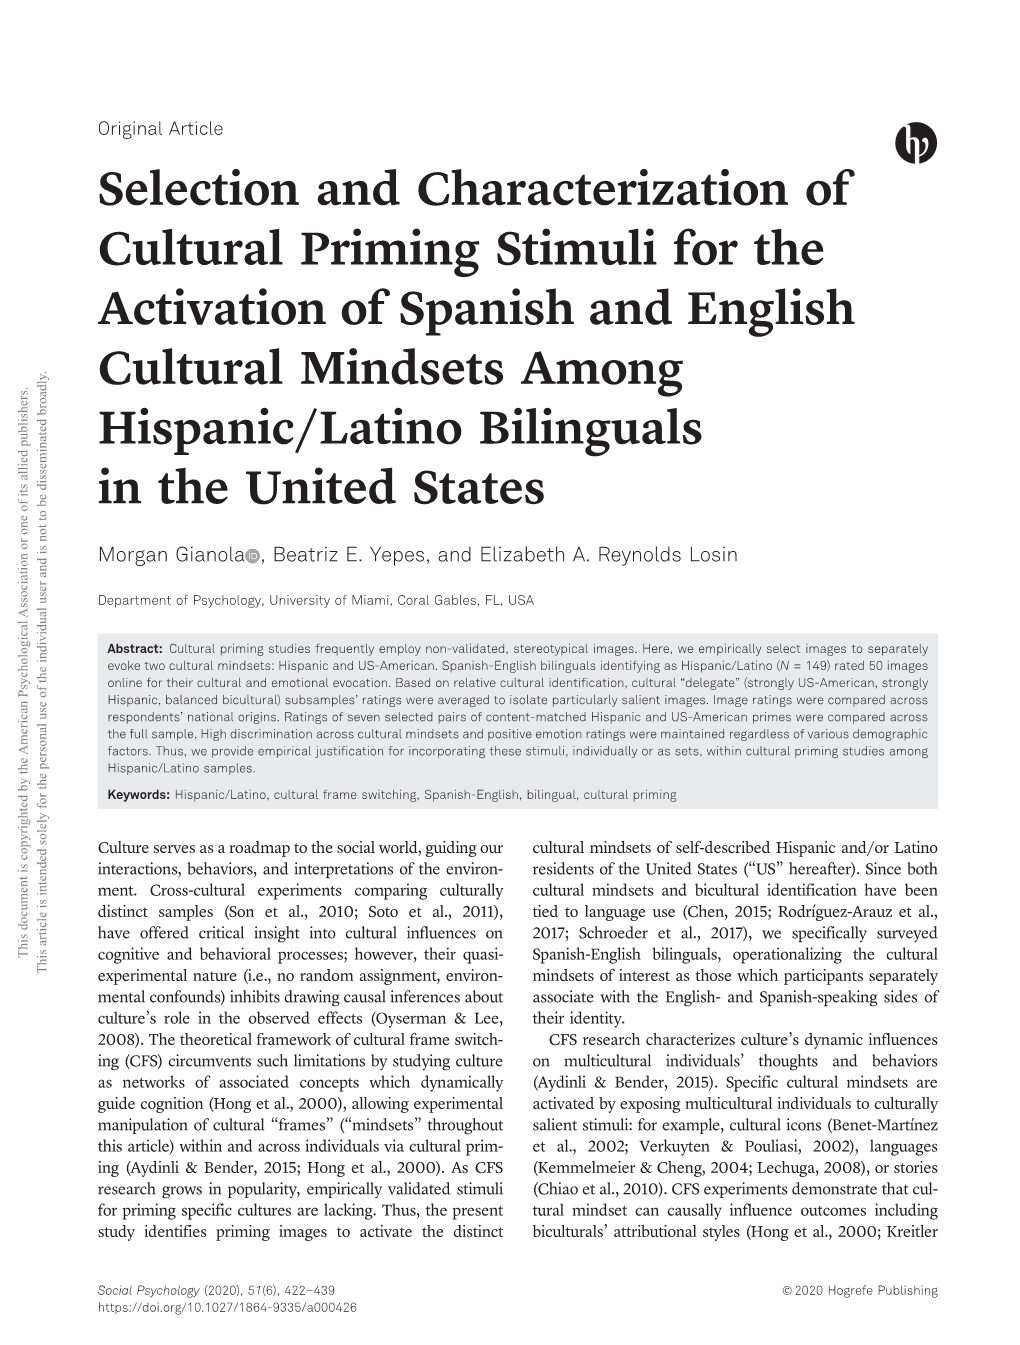 Selection and Characterization of Cultural Priming Stimuli for The